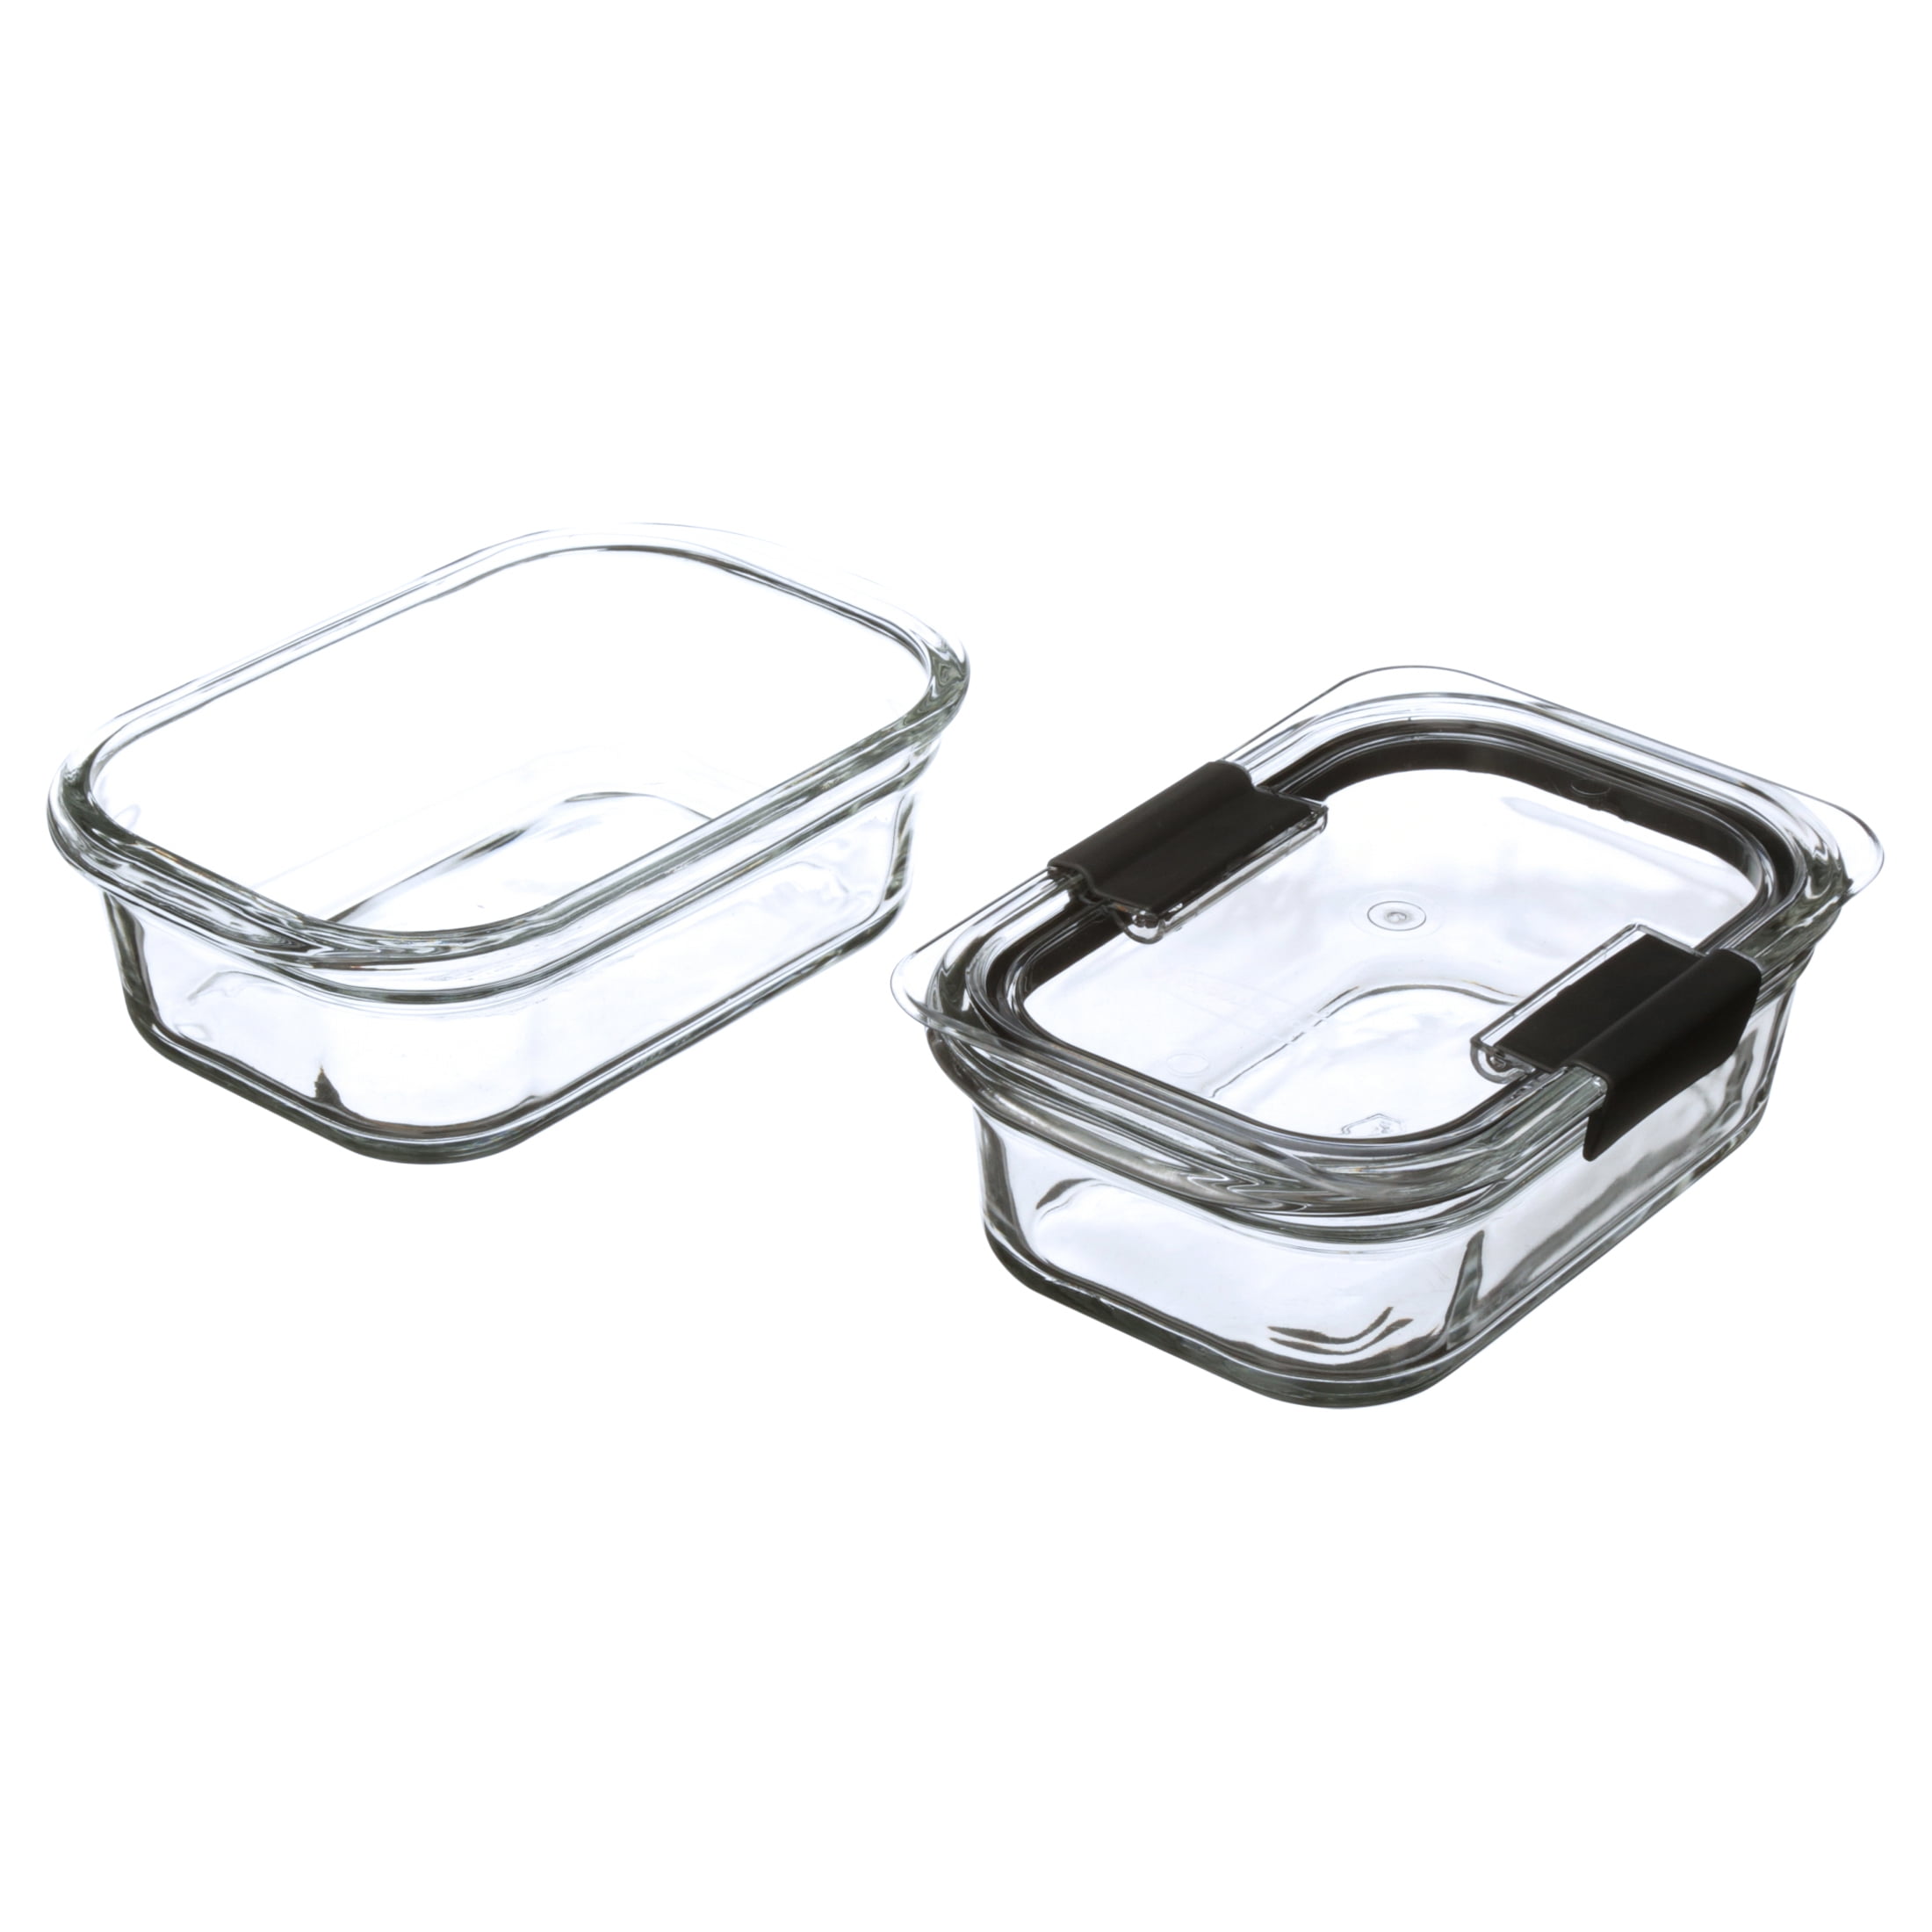 Oven Safe Glass Food Storage Container Set with Plastic Lids - 4 Pack, 4 PC  - Gerbes Super Markets